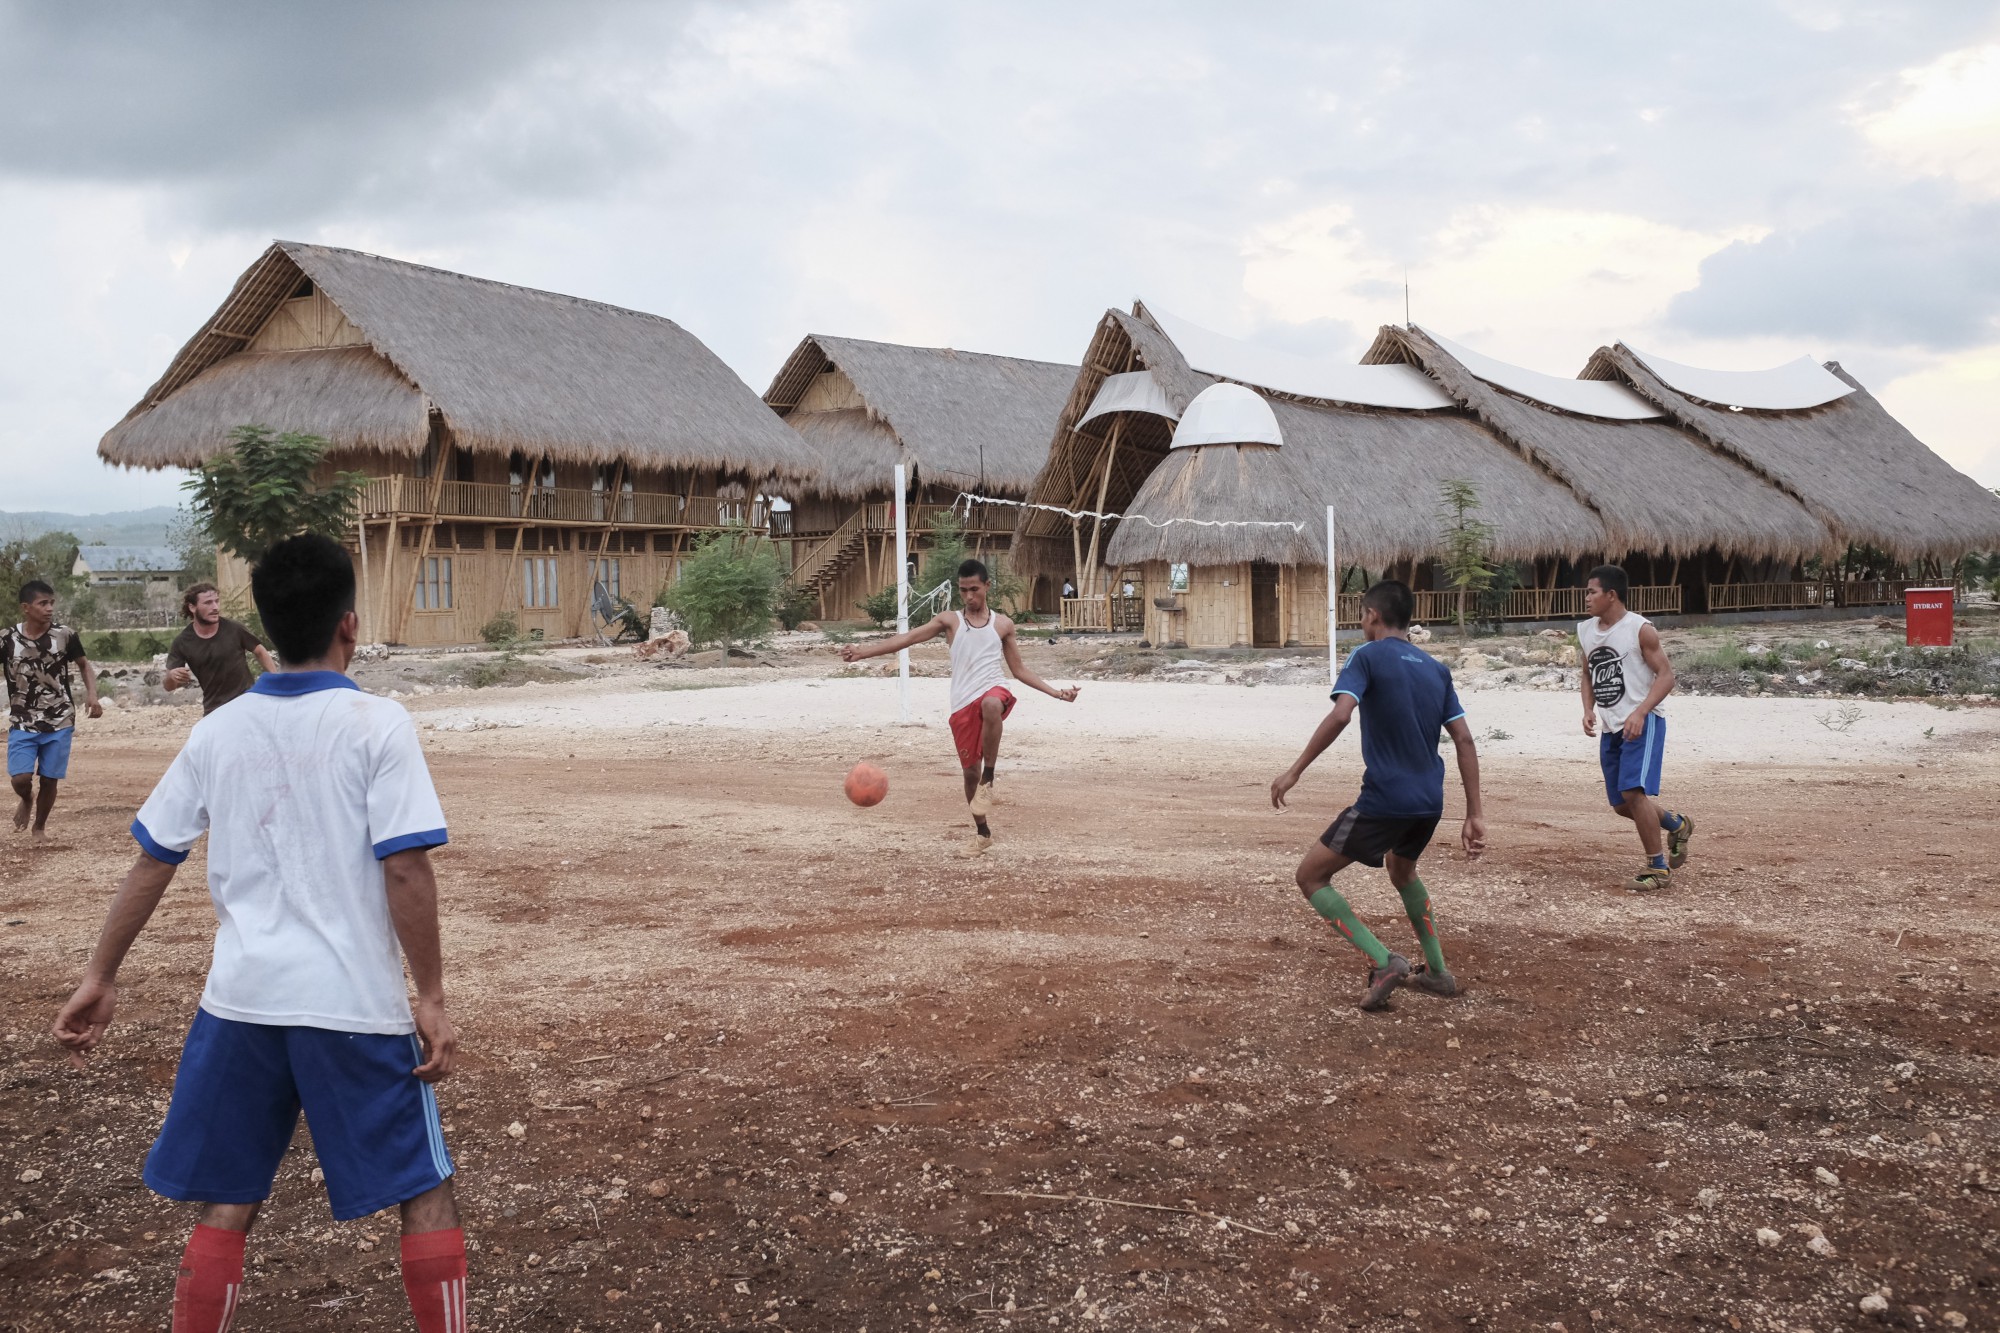 Taking a break from studies, the Sumbanese youth engage in an energetic game of football. Guests are welcome to participate too!